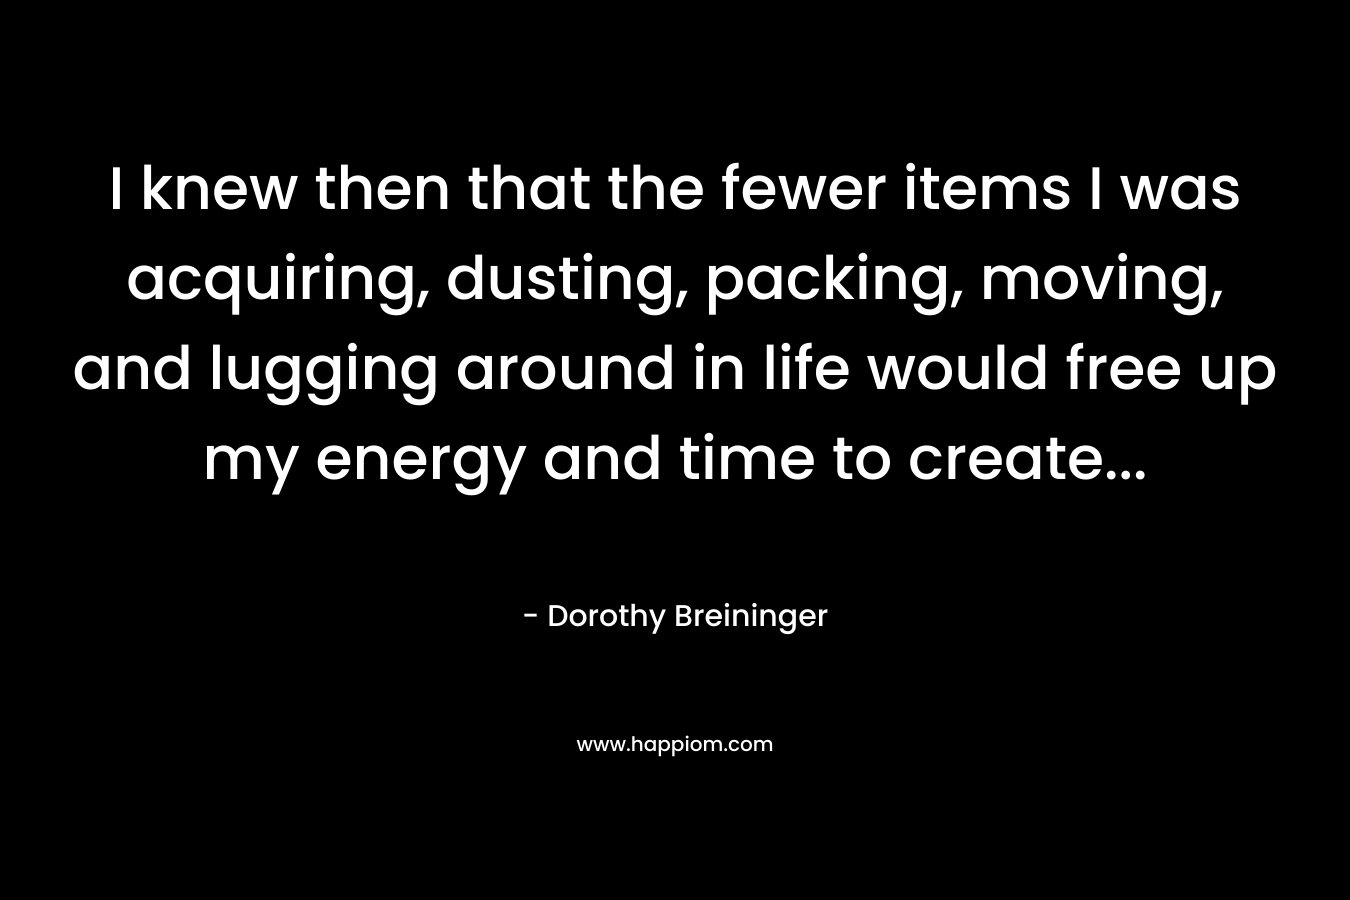 I knew then that the fewer items I was acquiring, dusting, packing, moving, and lugging around in life would free up my energy and time to create...